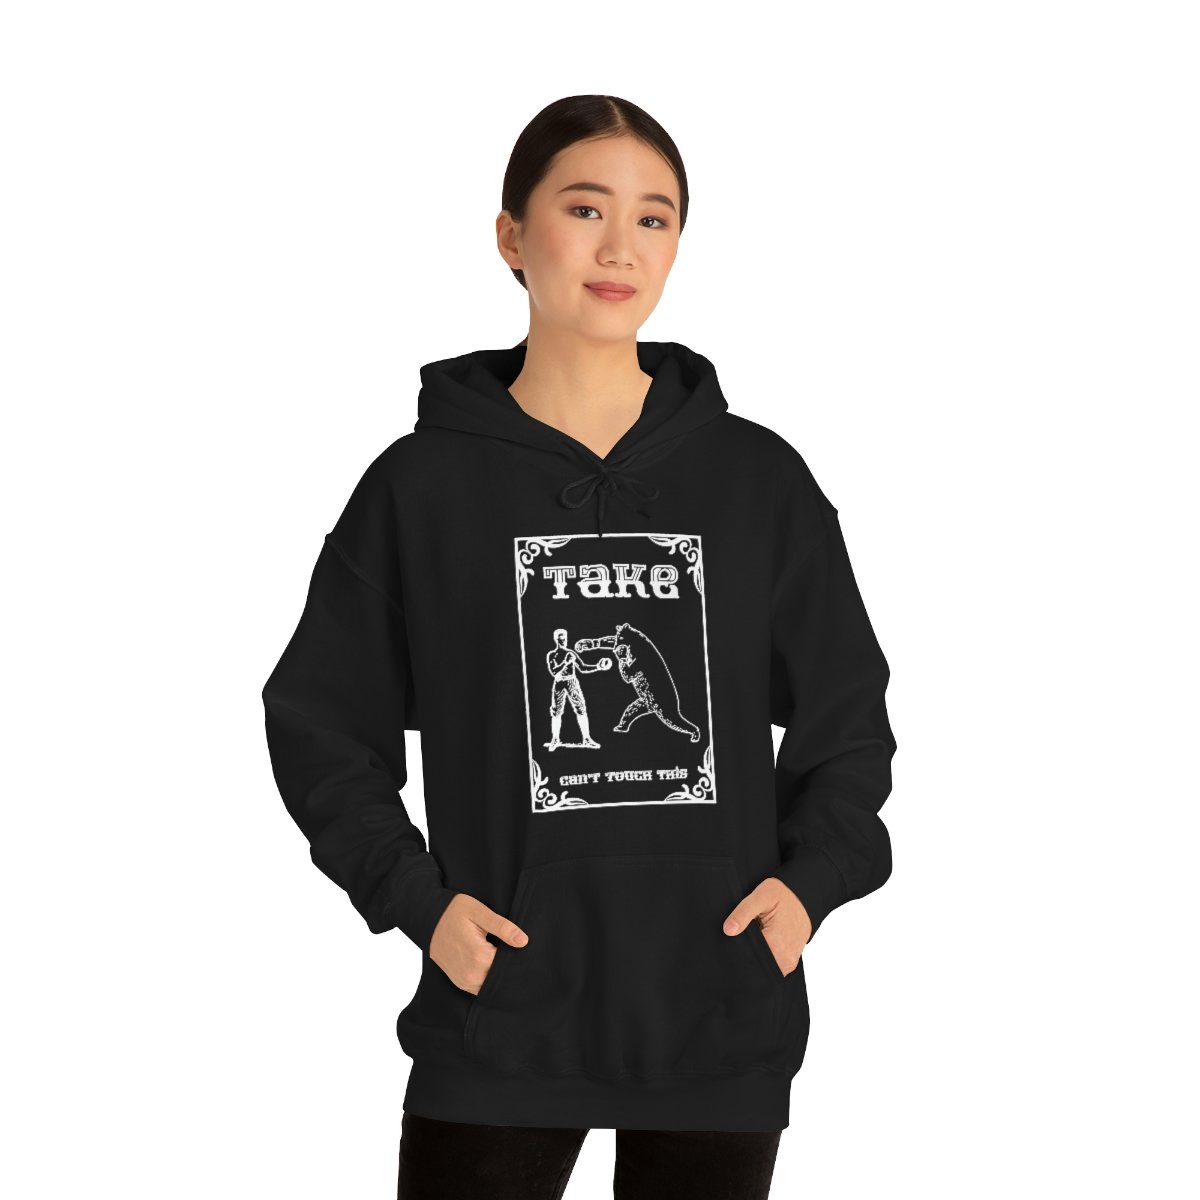 Take – Can’t Touch This Pullover Hooded Sweatshirt